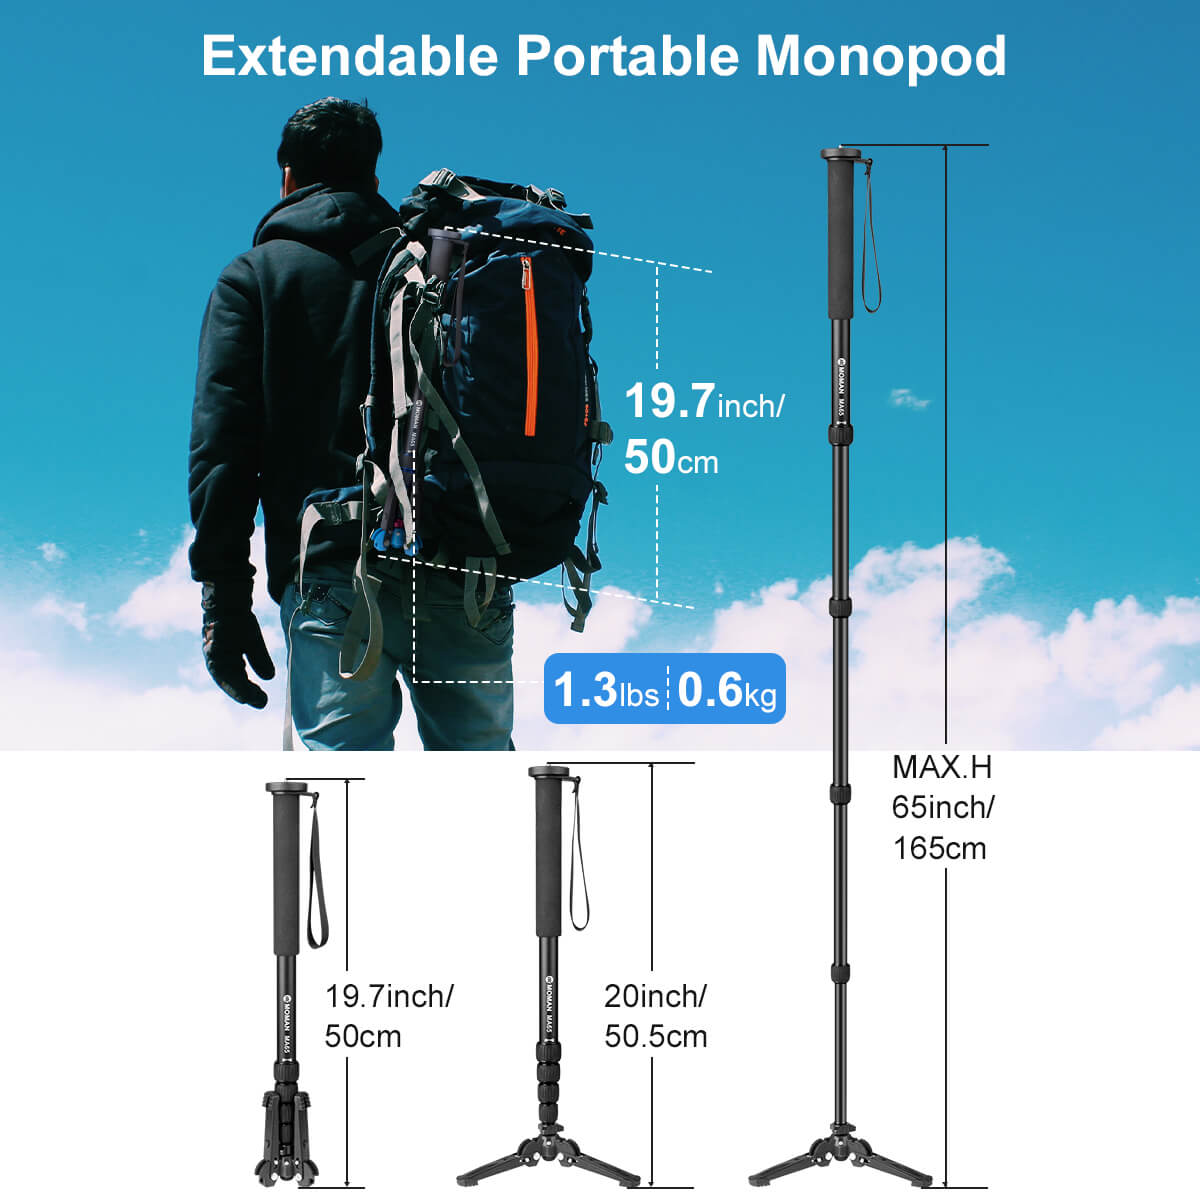 Moman MA65 extendable portable monopod is adjustable from 19.7inch to max height of 65inch. It can be compact while being enough for higher view